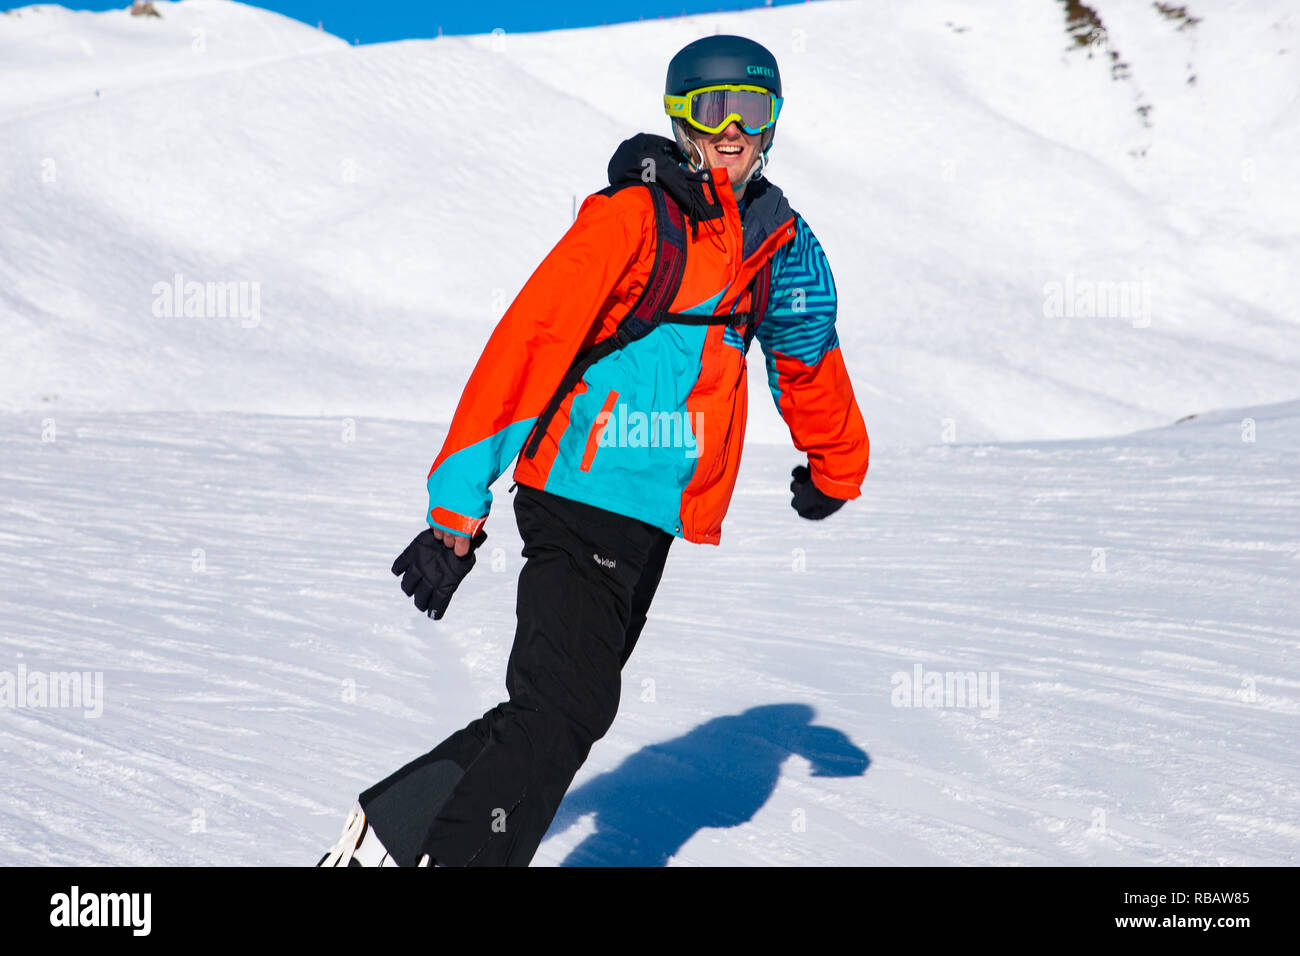 People enjoy snowboard for winter holiday in Alps area, Les Arcs 2000, Savoie, France, Europe Stock Photo